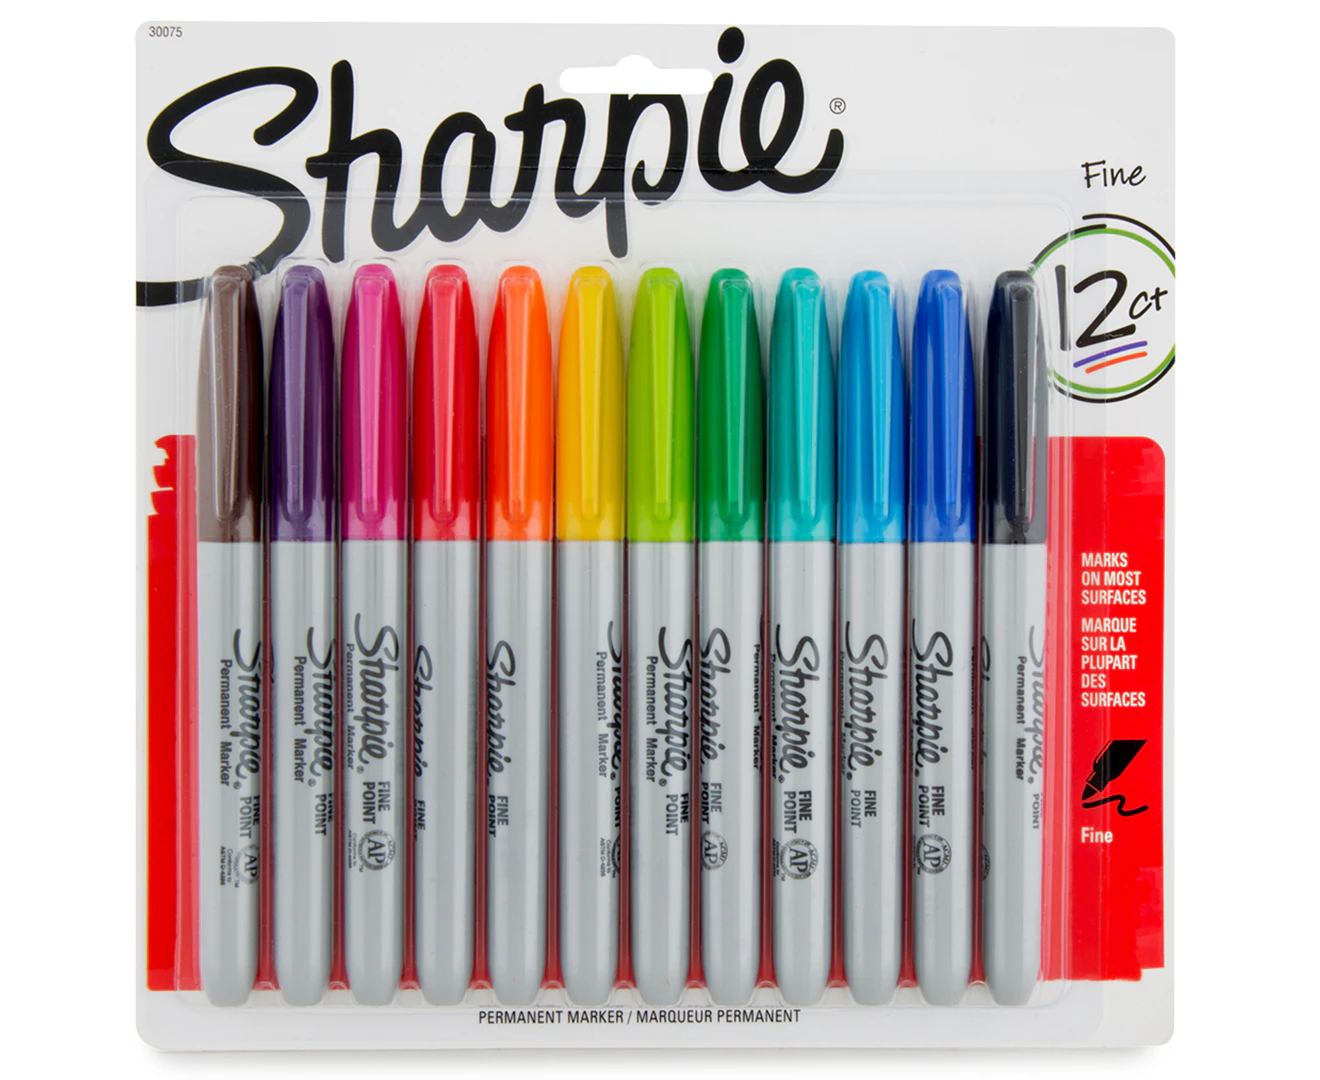  Sharpie Rub-a-Dub Permanent Marker, Fine Point, Black Ink,  1-Count : Permanent Markers : Office Products